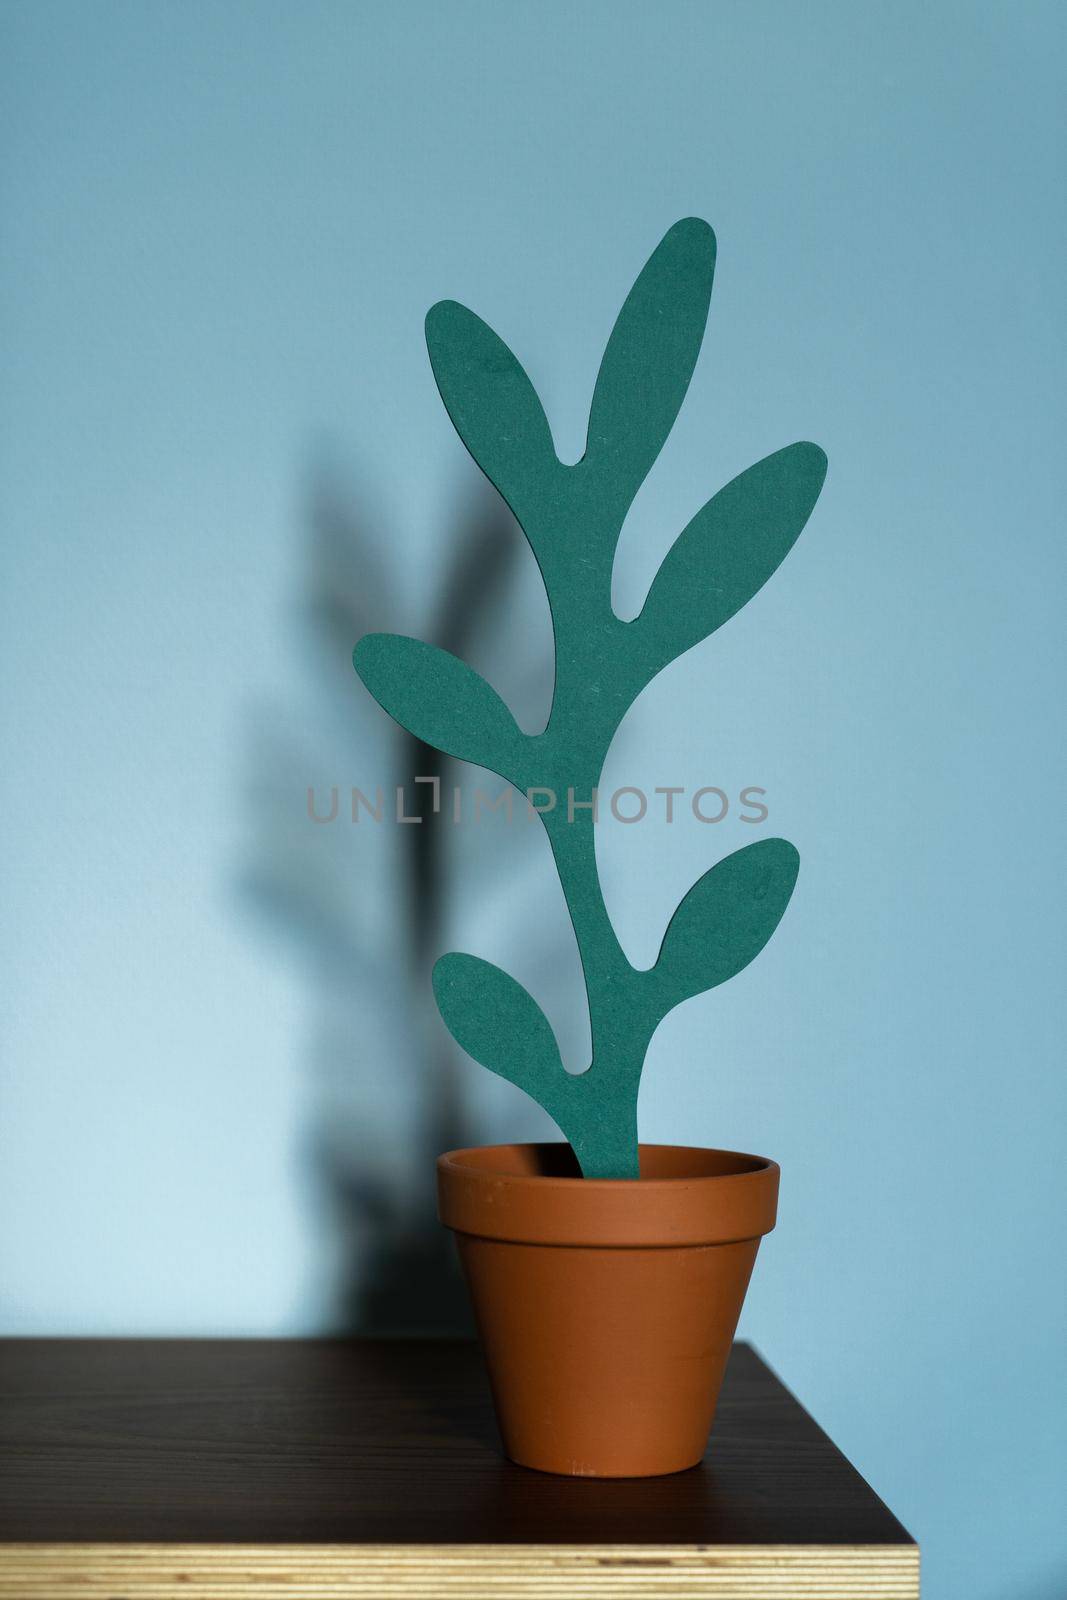 An artificial wooden plant shape in a terracotta pot on a wooden table on a blue background. The concept of office interior, home comfort, lifestyle. Mock-up with copy space for your text.